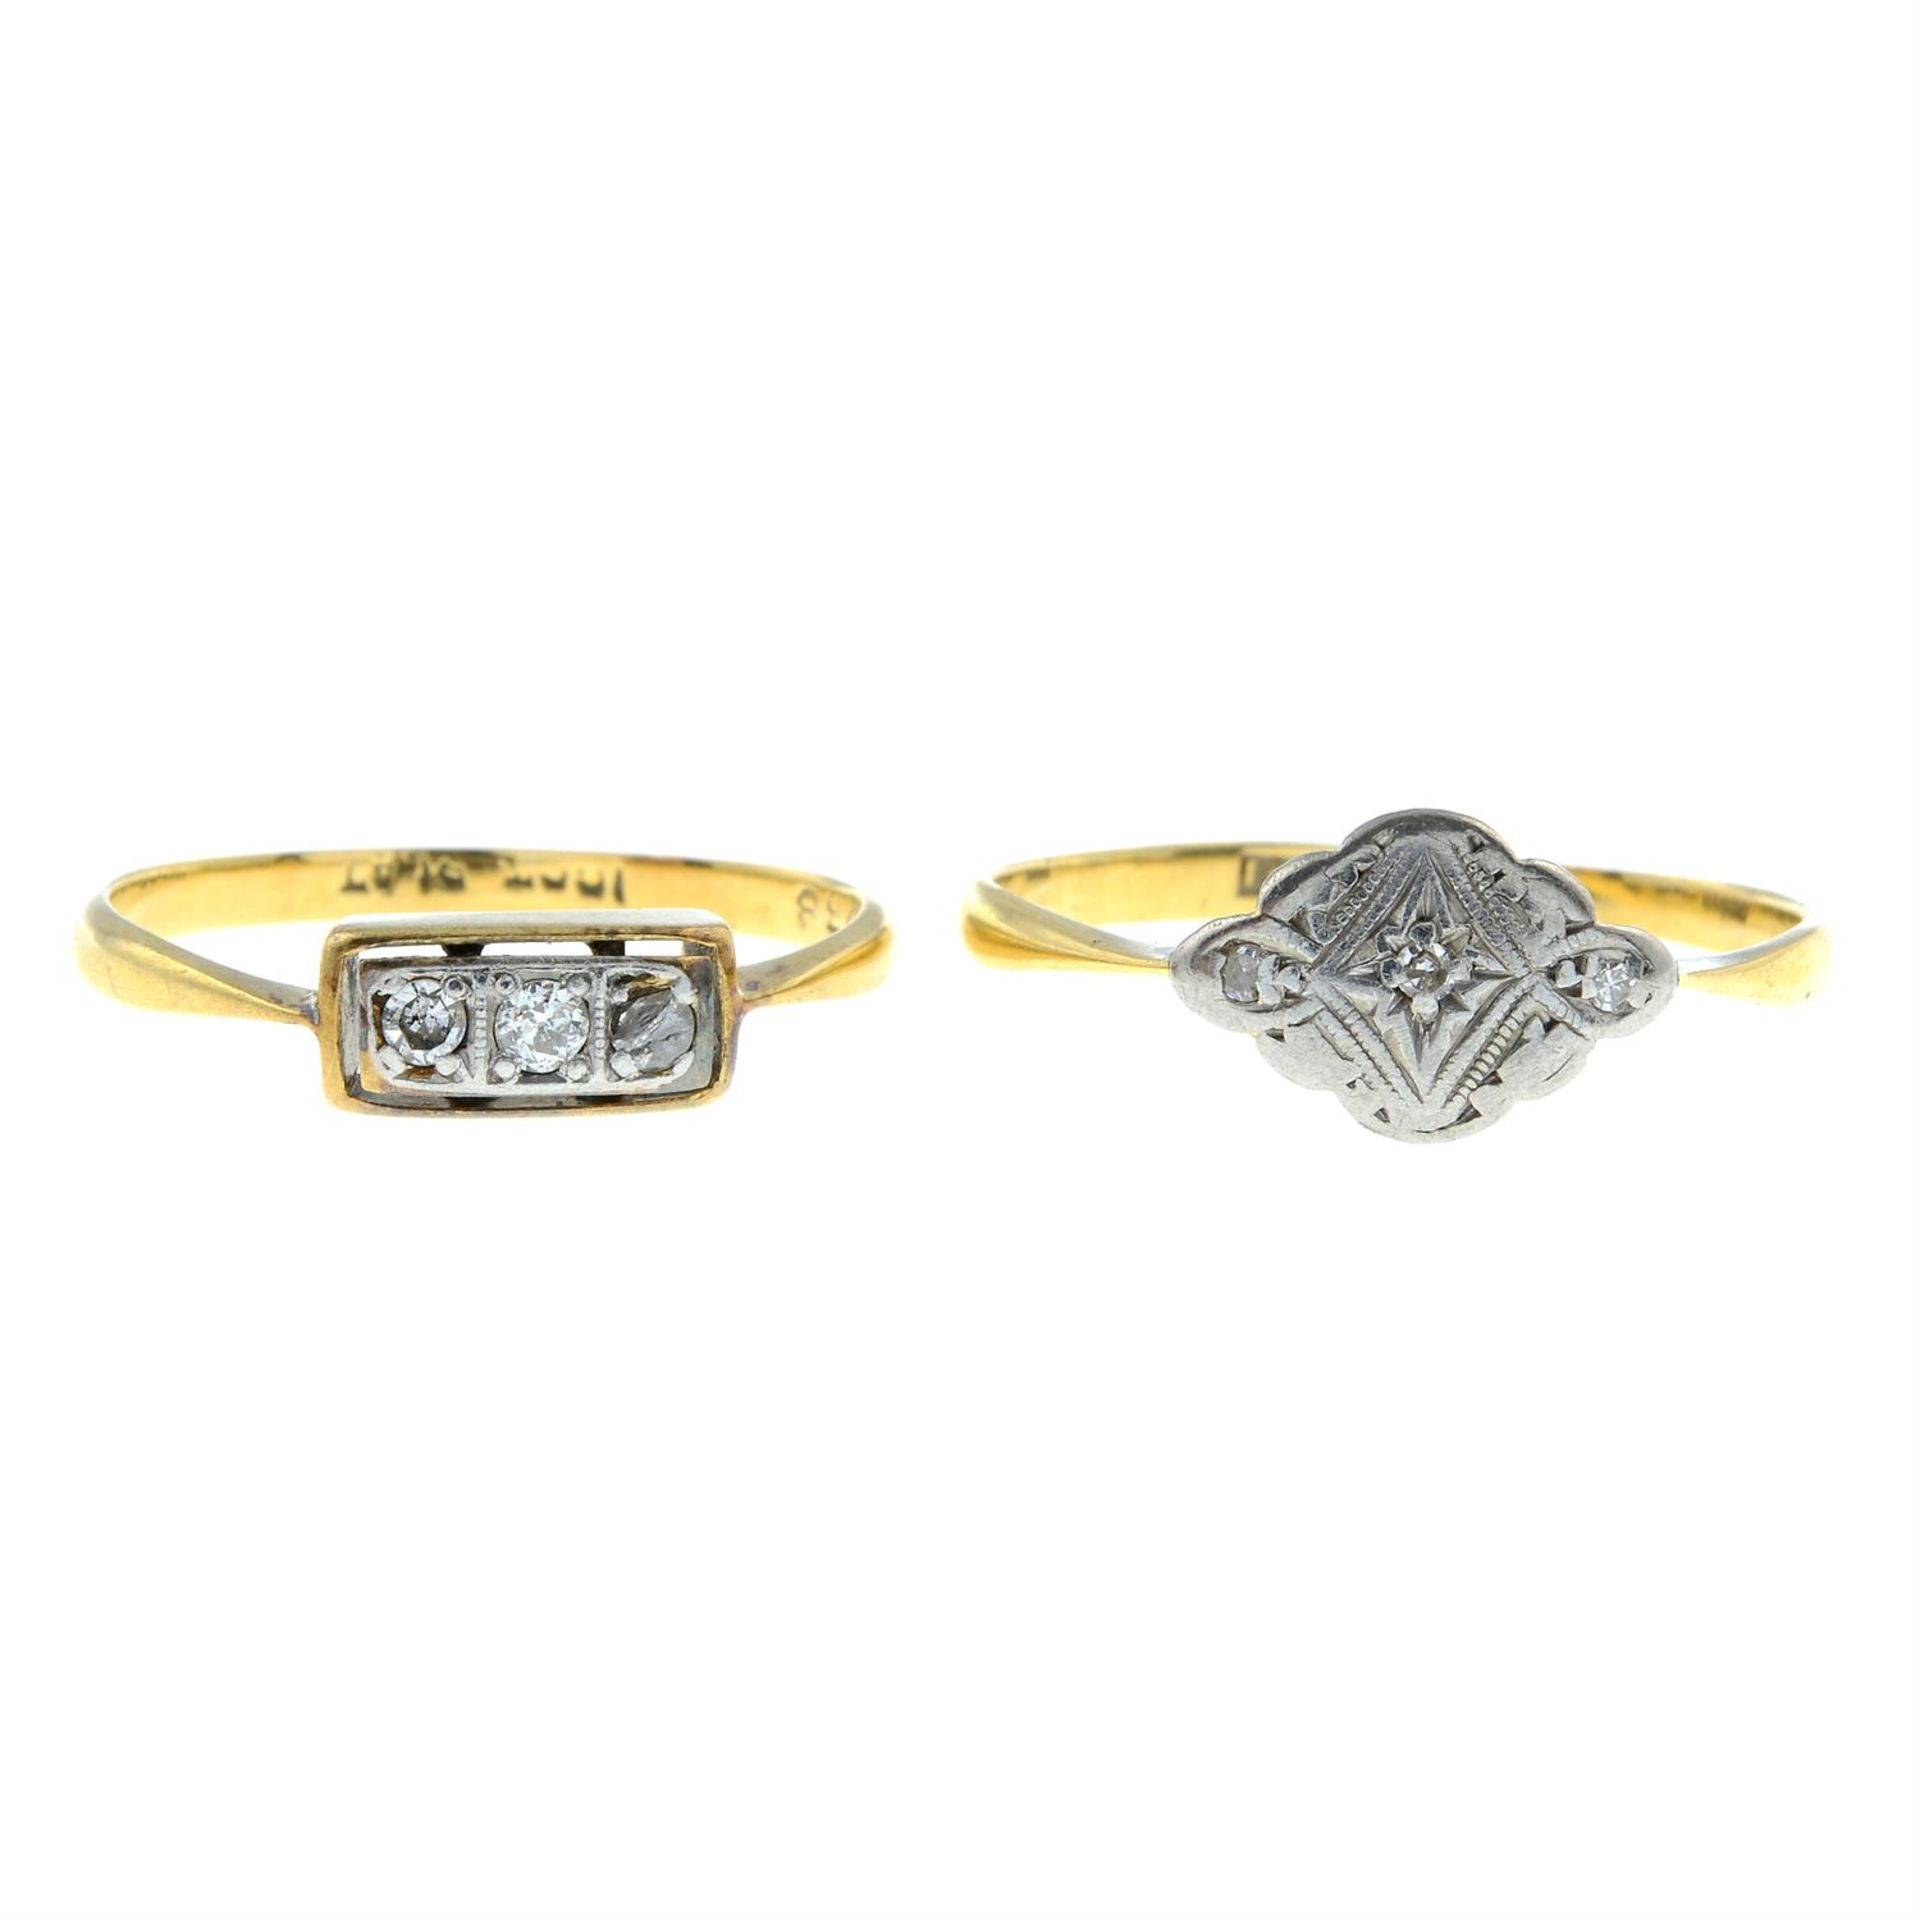 Two early 20th century 18ct gold and platinum diamond rings.